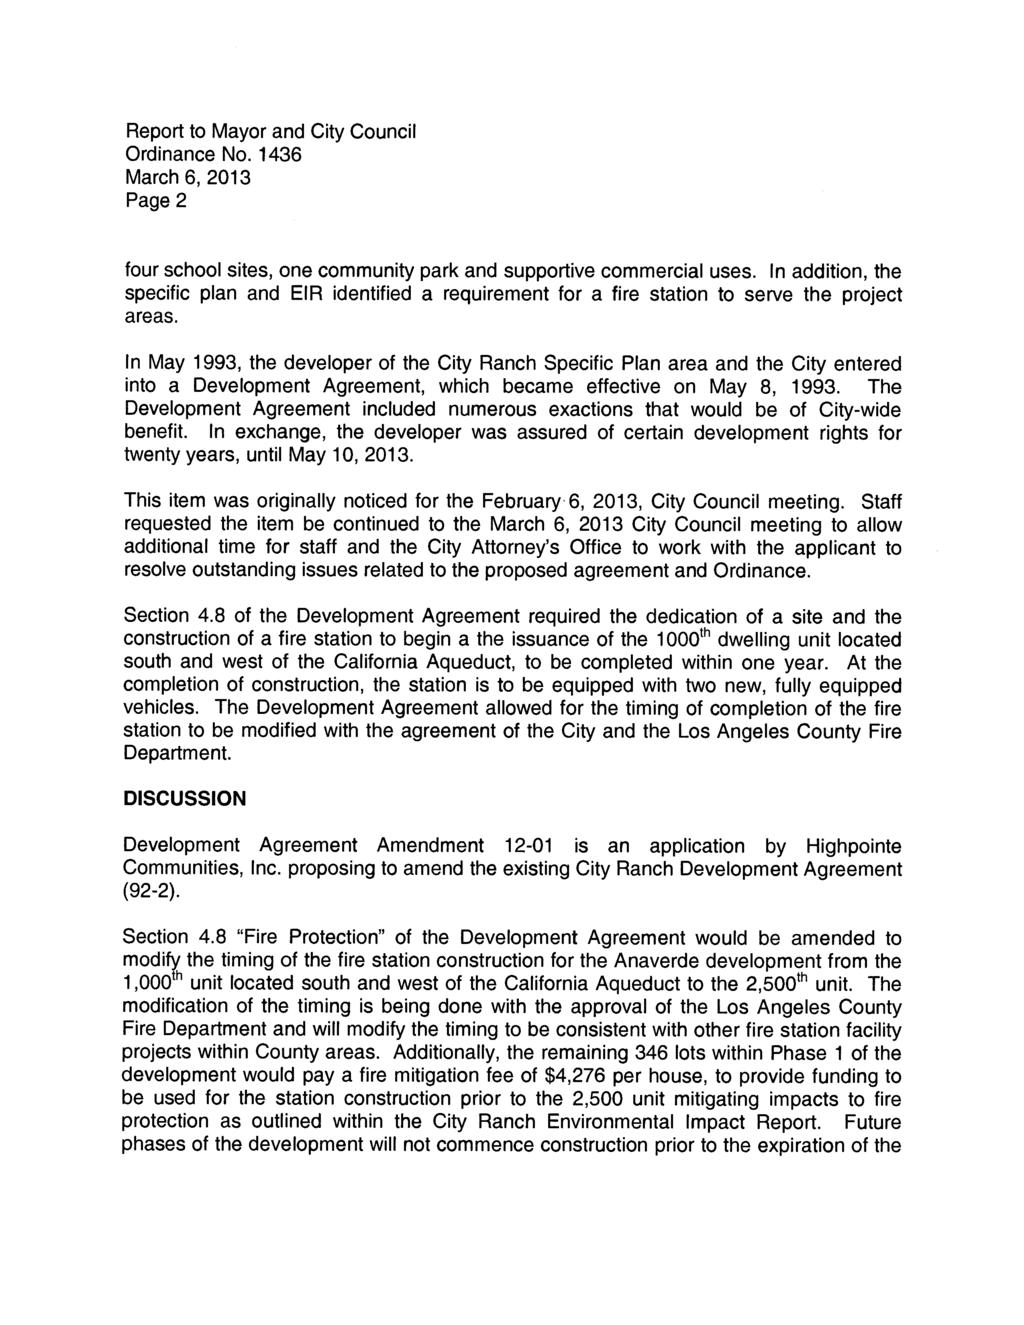 Report to Mayor and City Council Ordinance No. 1436 March 6, 2013 Page 2 four school sites, one community park and supportive commercial uses.